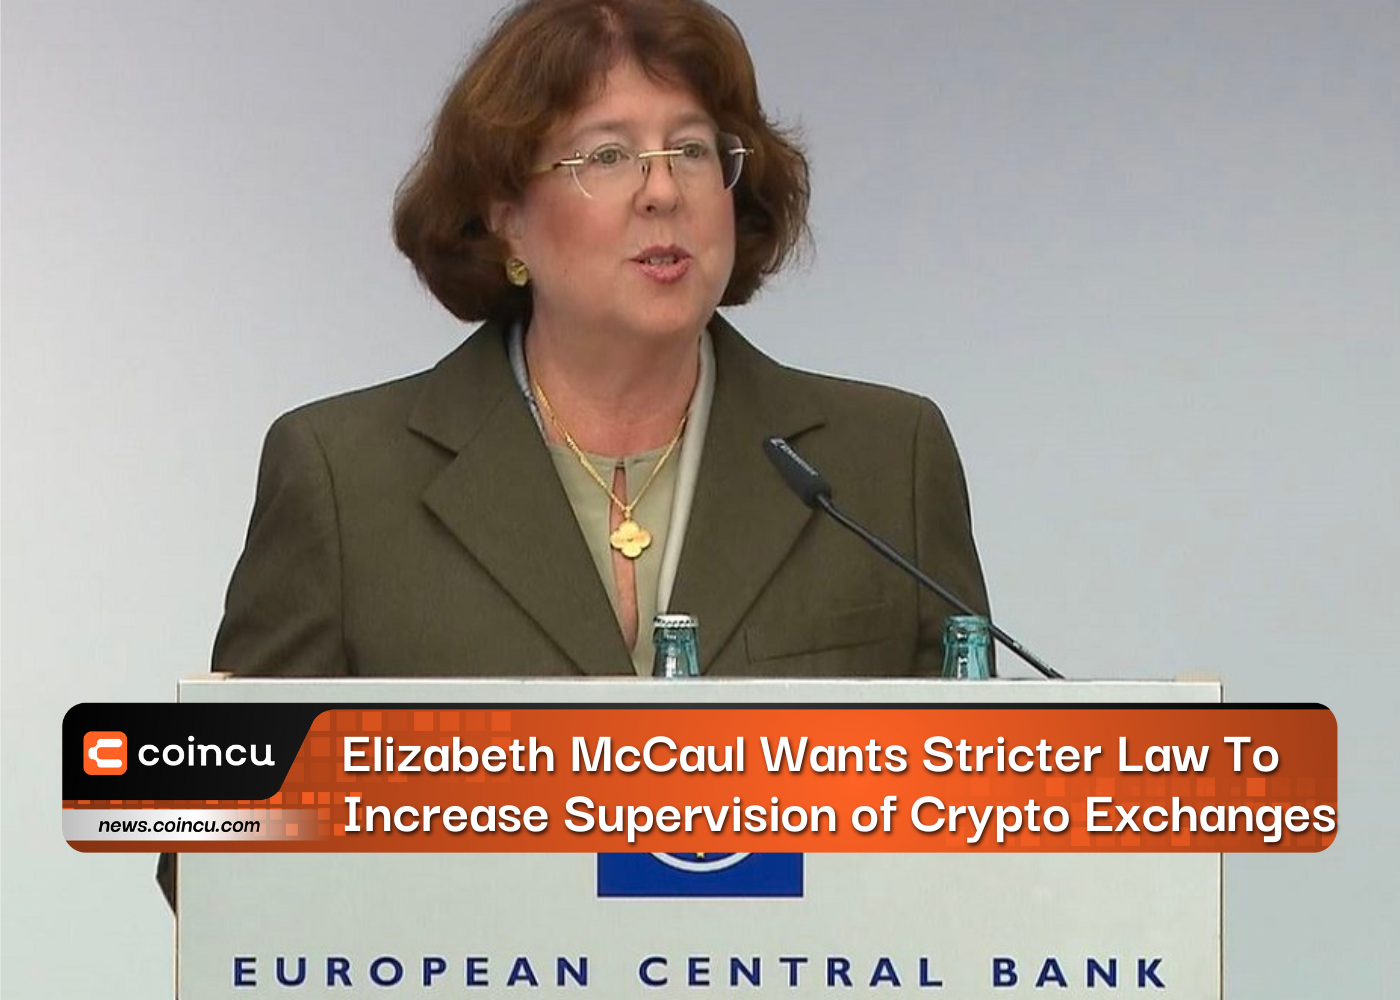 Elizabeth McCaul Wants Stricter Law To Increase Supervision Of Crypto Exchanges